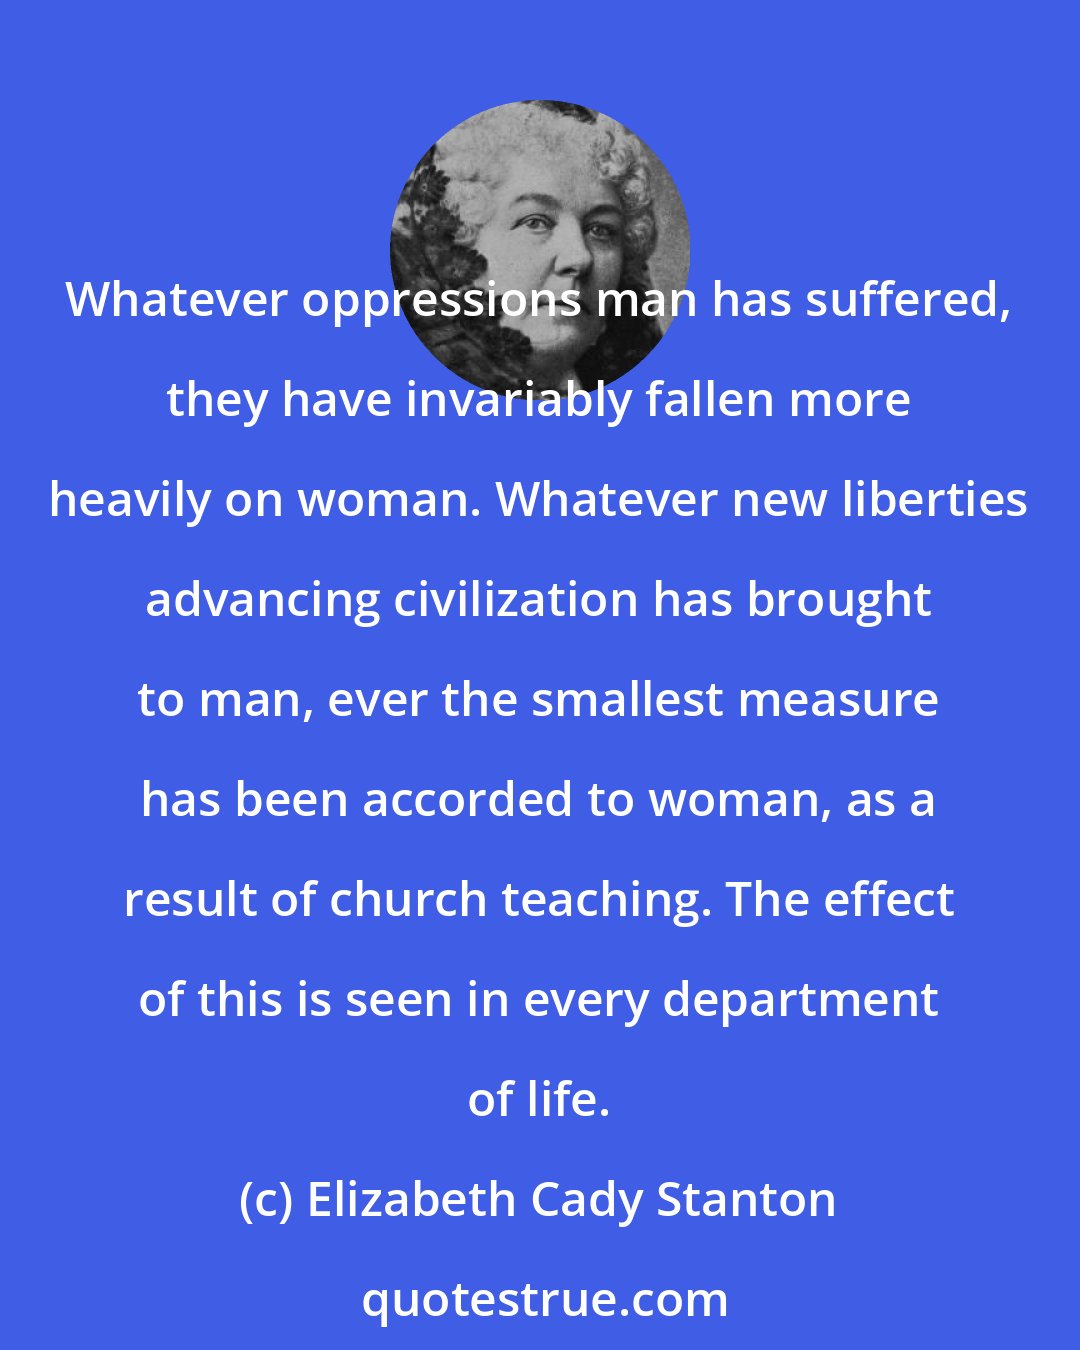 Elizabeth Cady Stanton: Whatever oppressions man has suffered, they have invariably fallen more heavily on woman. Whatever new liberties advancing civilization has brought to man, ever the smallest measure has been accorded to woman, as a result of church teaching. The effect of this is seen in every department of life.